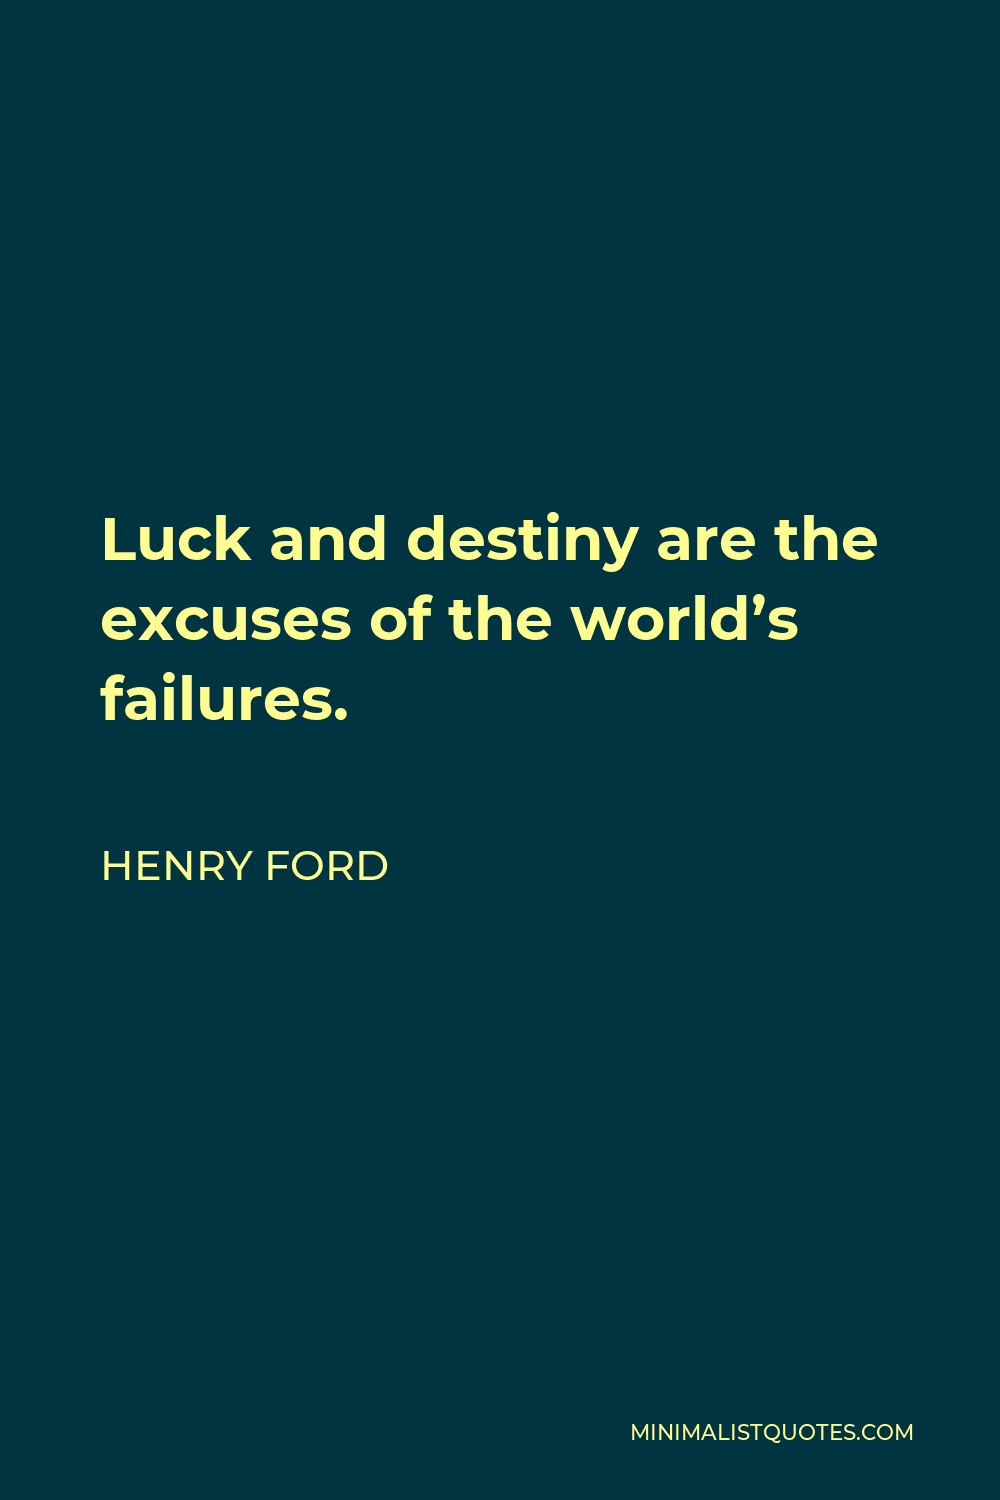 Henry Ford Quote - Luck and destiny are the excuses of the world’s failures.